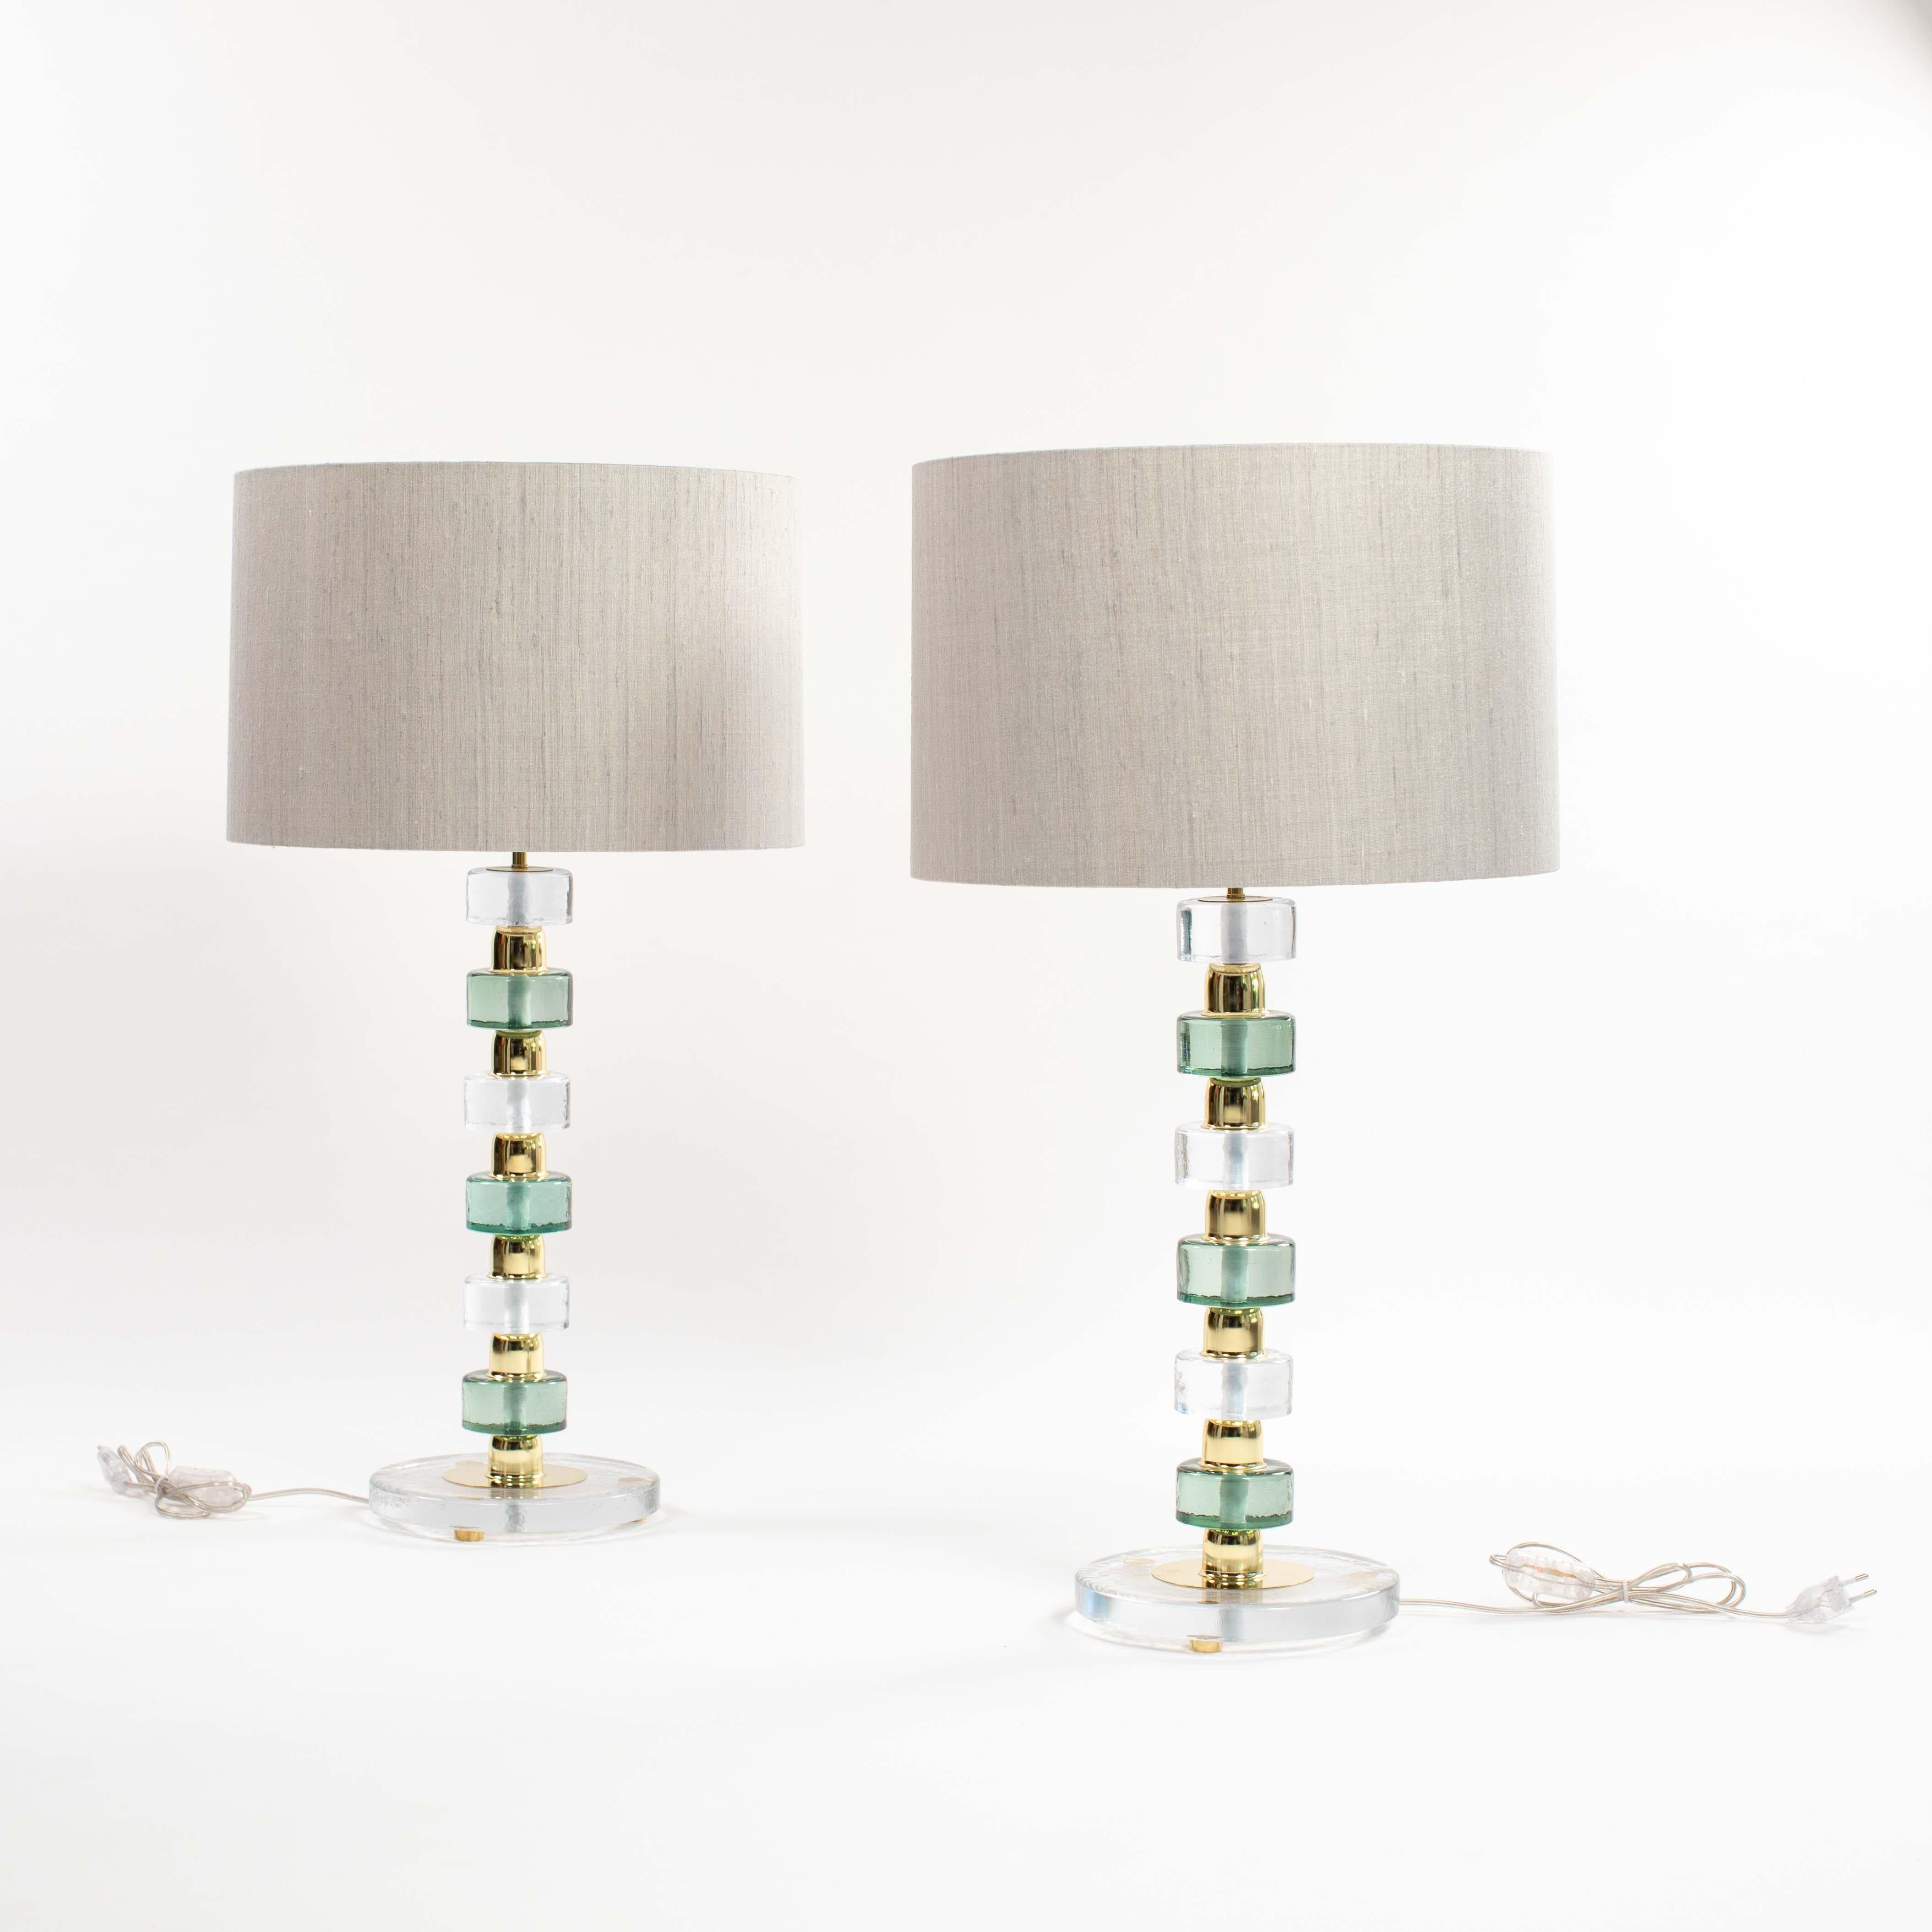 Pair of light-footed Murano glass table lamps with alternating transparent and emerald green glass discs.
A brass spacer with a small lip at the bottom is placed between them.
The base has a diameter of 23cm, the discs 8.0cm, the discs are 4.0cm